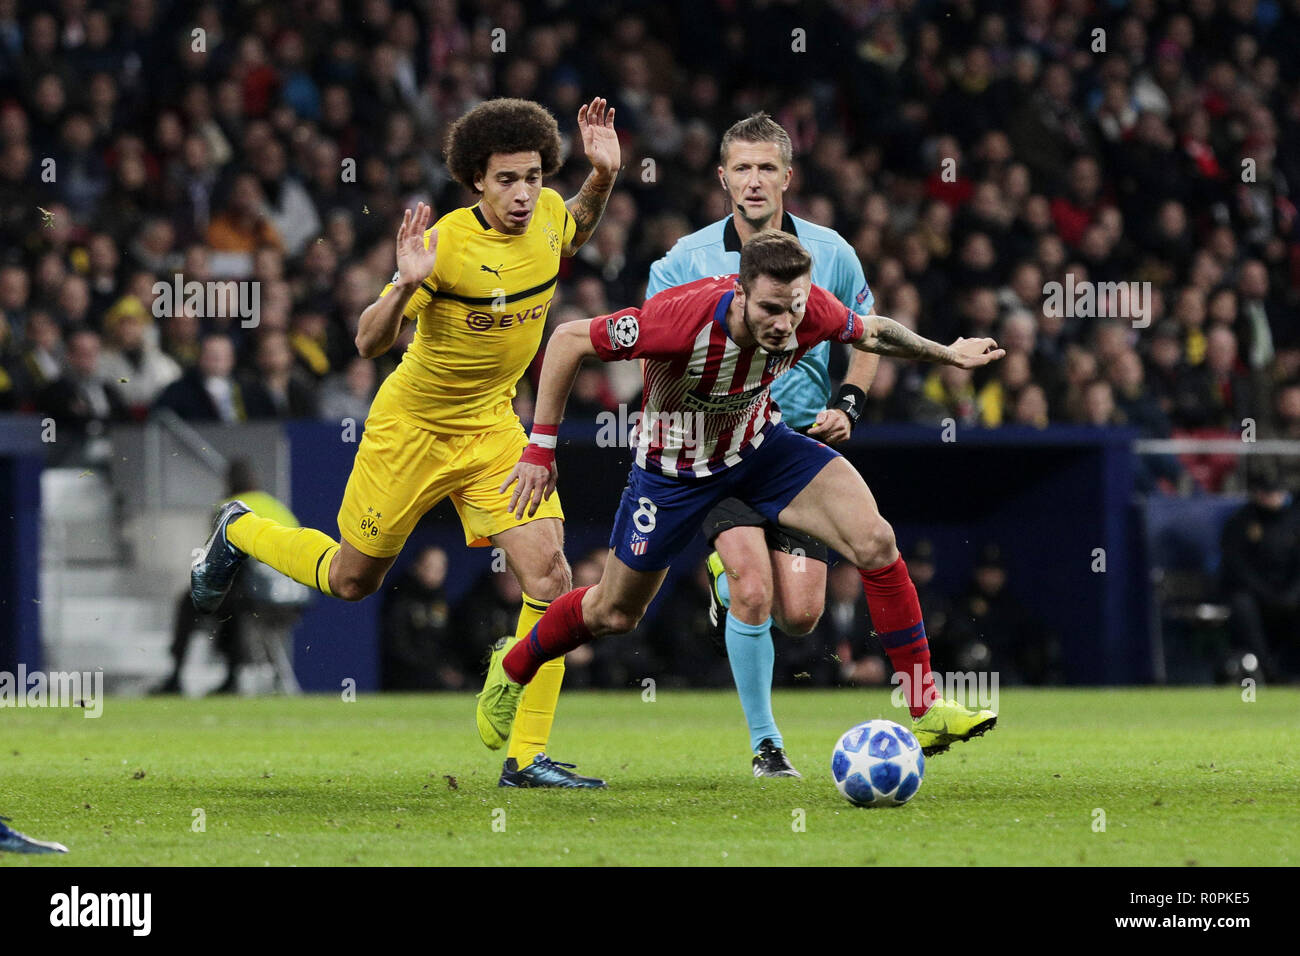 Madrid, Madrid, Spain. 6th Nov, 2018. Atletico de Madrid's Saul Niguez and Borussia Dortmund's Axel Witsel during UEFA Champions League match between Atletico de Madrid and Borussia Dortmund at Wanda Metropolitano Stadium. Credit: Legan P. Mace/SOPA Images/ZUMA Wire/Alamy Live News Stock Photo